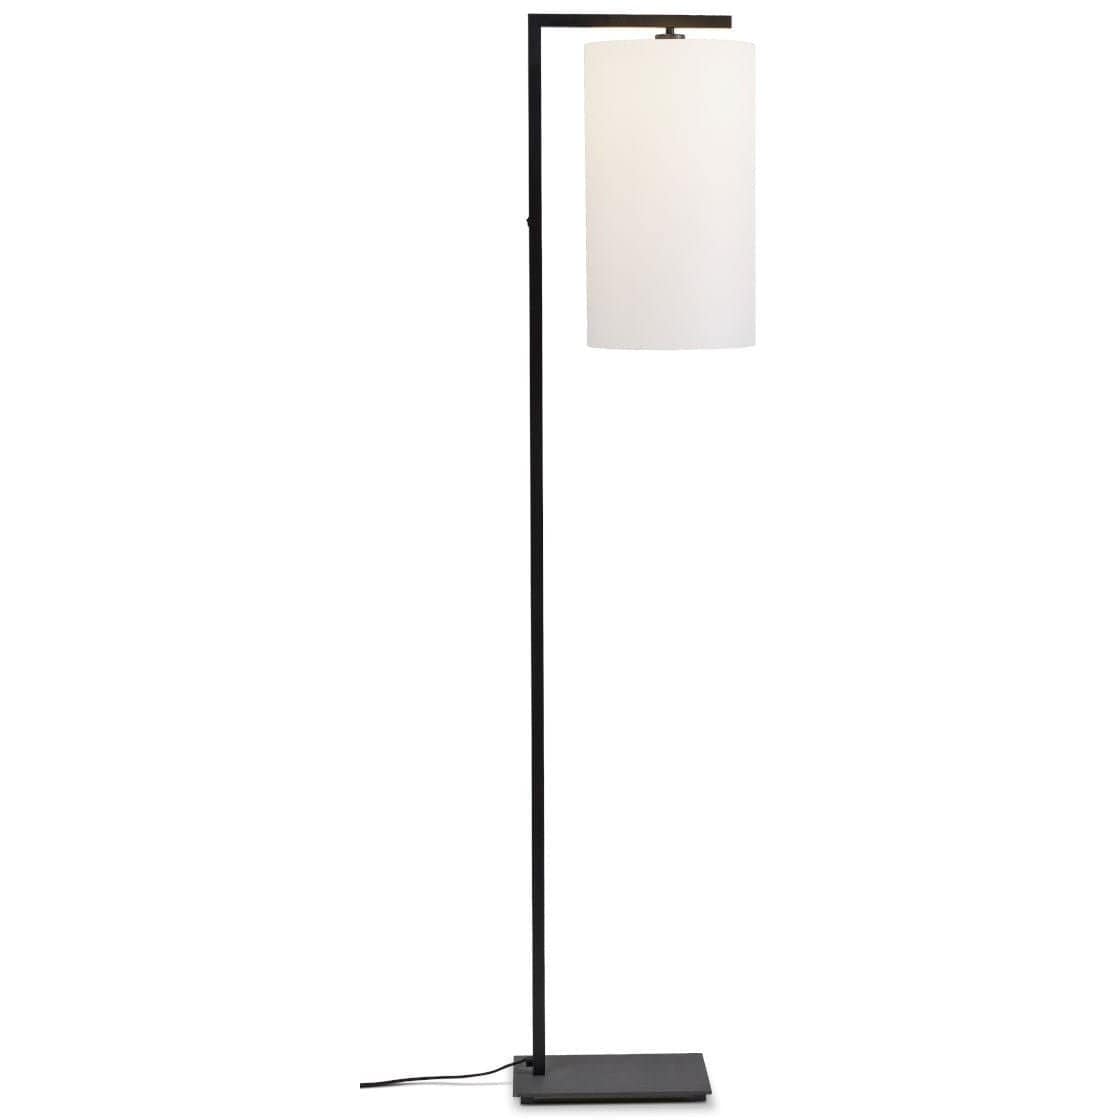 It's About RoMi Floor Lamp White Boston 2545 Floor Lamp, various shade colours